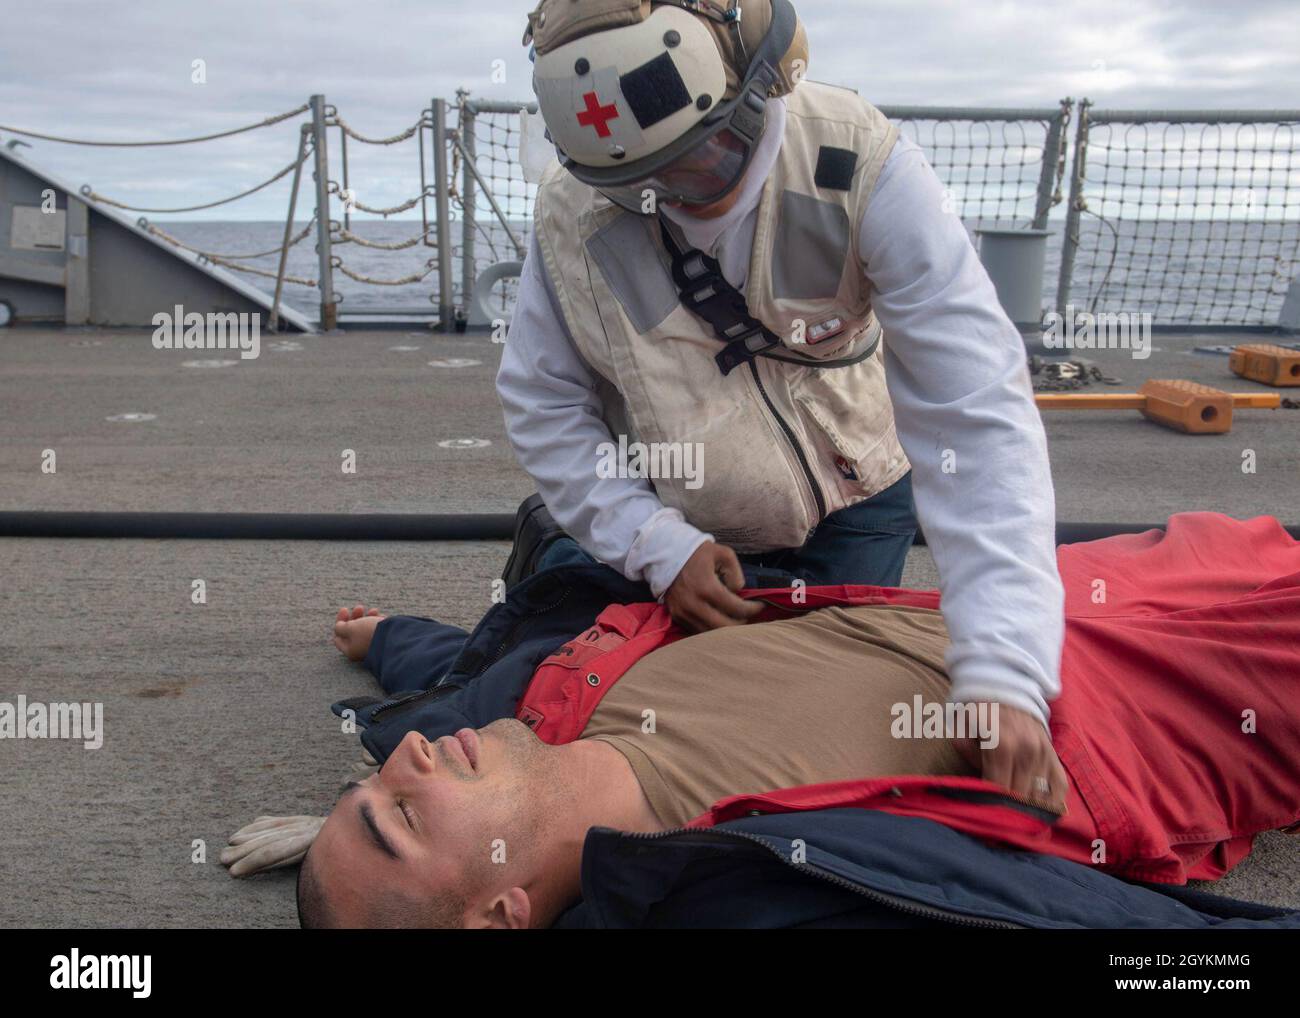 PACIFIC OCEAN (Jan. 21, 2020) Hospital Corpsman 3rd Class Lona Rachal, from Natchitoches, La., searches for simulated wounds on Damage Controlman 2nd Class Oscar Bernal, from San Jose, Calif., during a crash and salvage drill on the flight deck of the Arleigh Burke-class guided-missile destroyer USS Paul Hamilton (DDG 60) Jan. 21, 2020. Paul Hamilton, part of the Theodore Roosevelt Carrier Strike Group, is on a scheduled deployment to the Indo-Pacific. (U.S. Navy photo by Mass Communication Specialist 3rd Class Matthew F. Jackson) Stock Photo